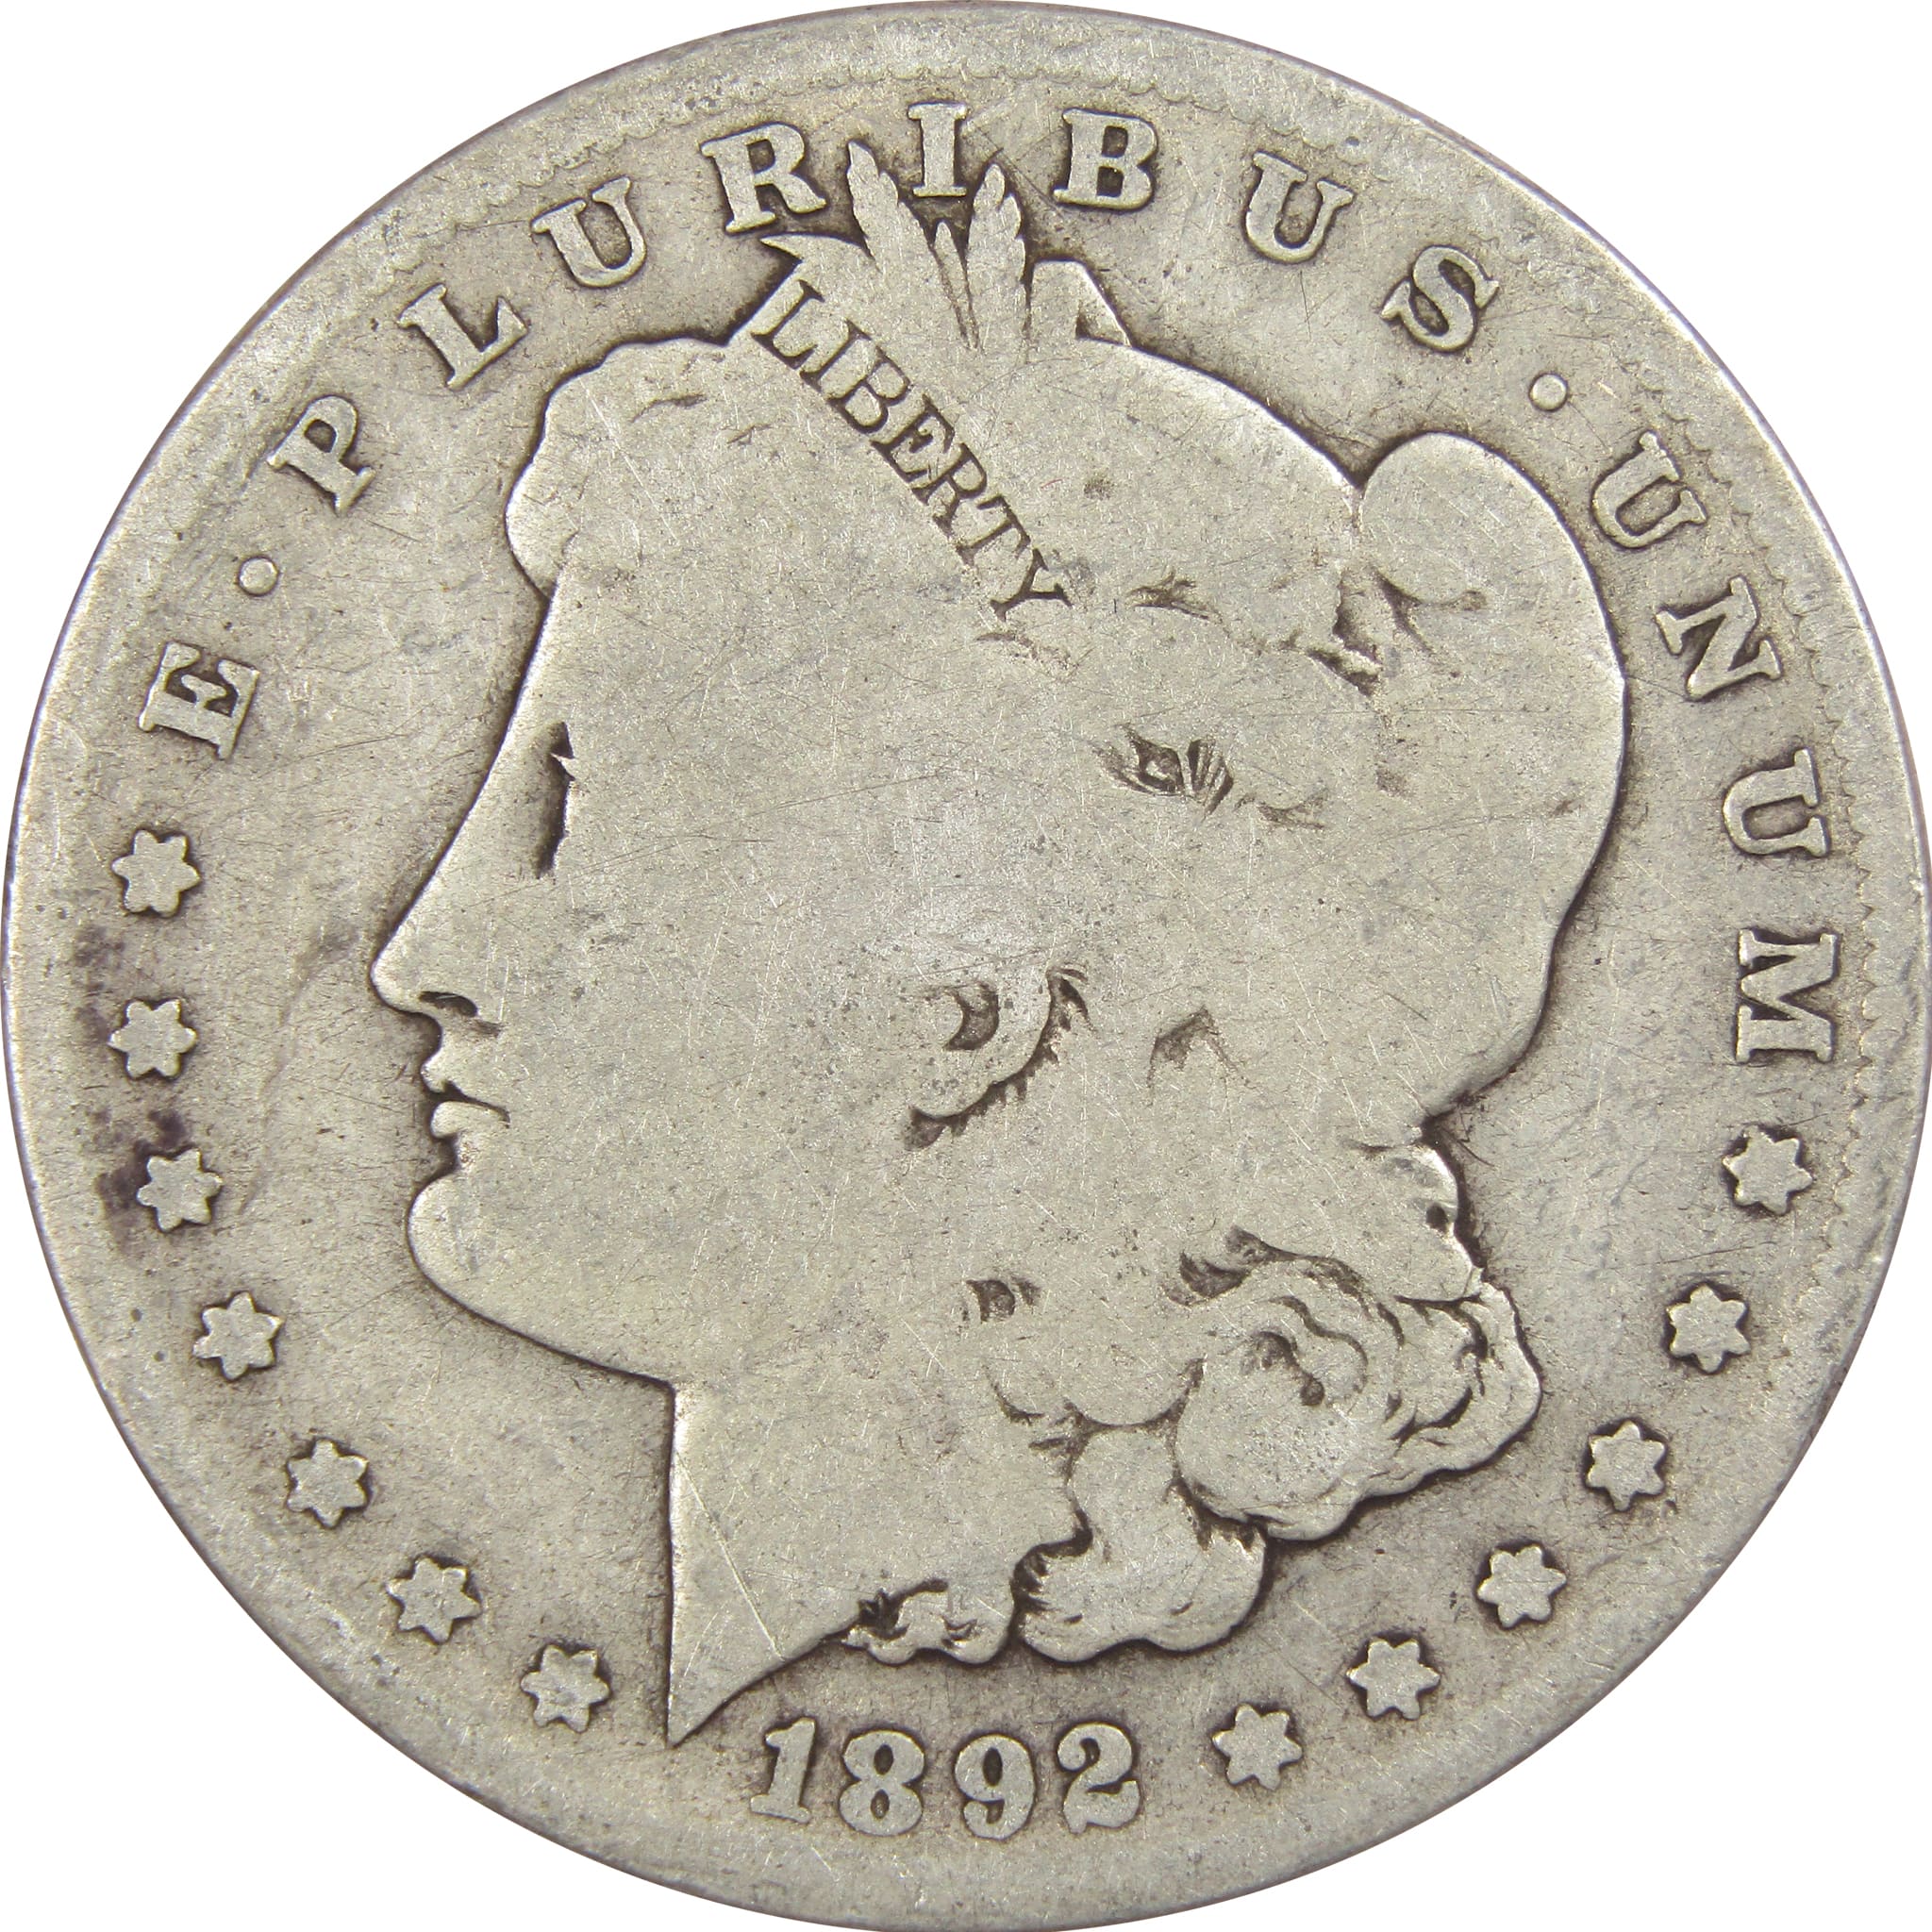 1892 S Morgan Dollar AG About Good 90% Silver US Coin SKU:IPC7443 - Morgan coin - Morgan silver dollar - Morgan silver dollar for sale - Profile Coins &amp; Collectibles